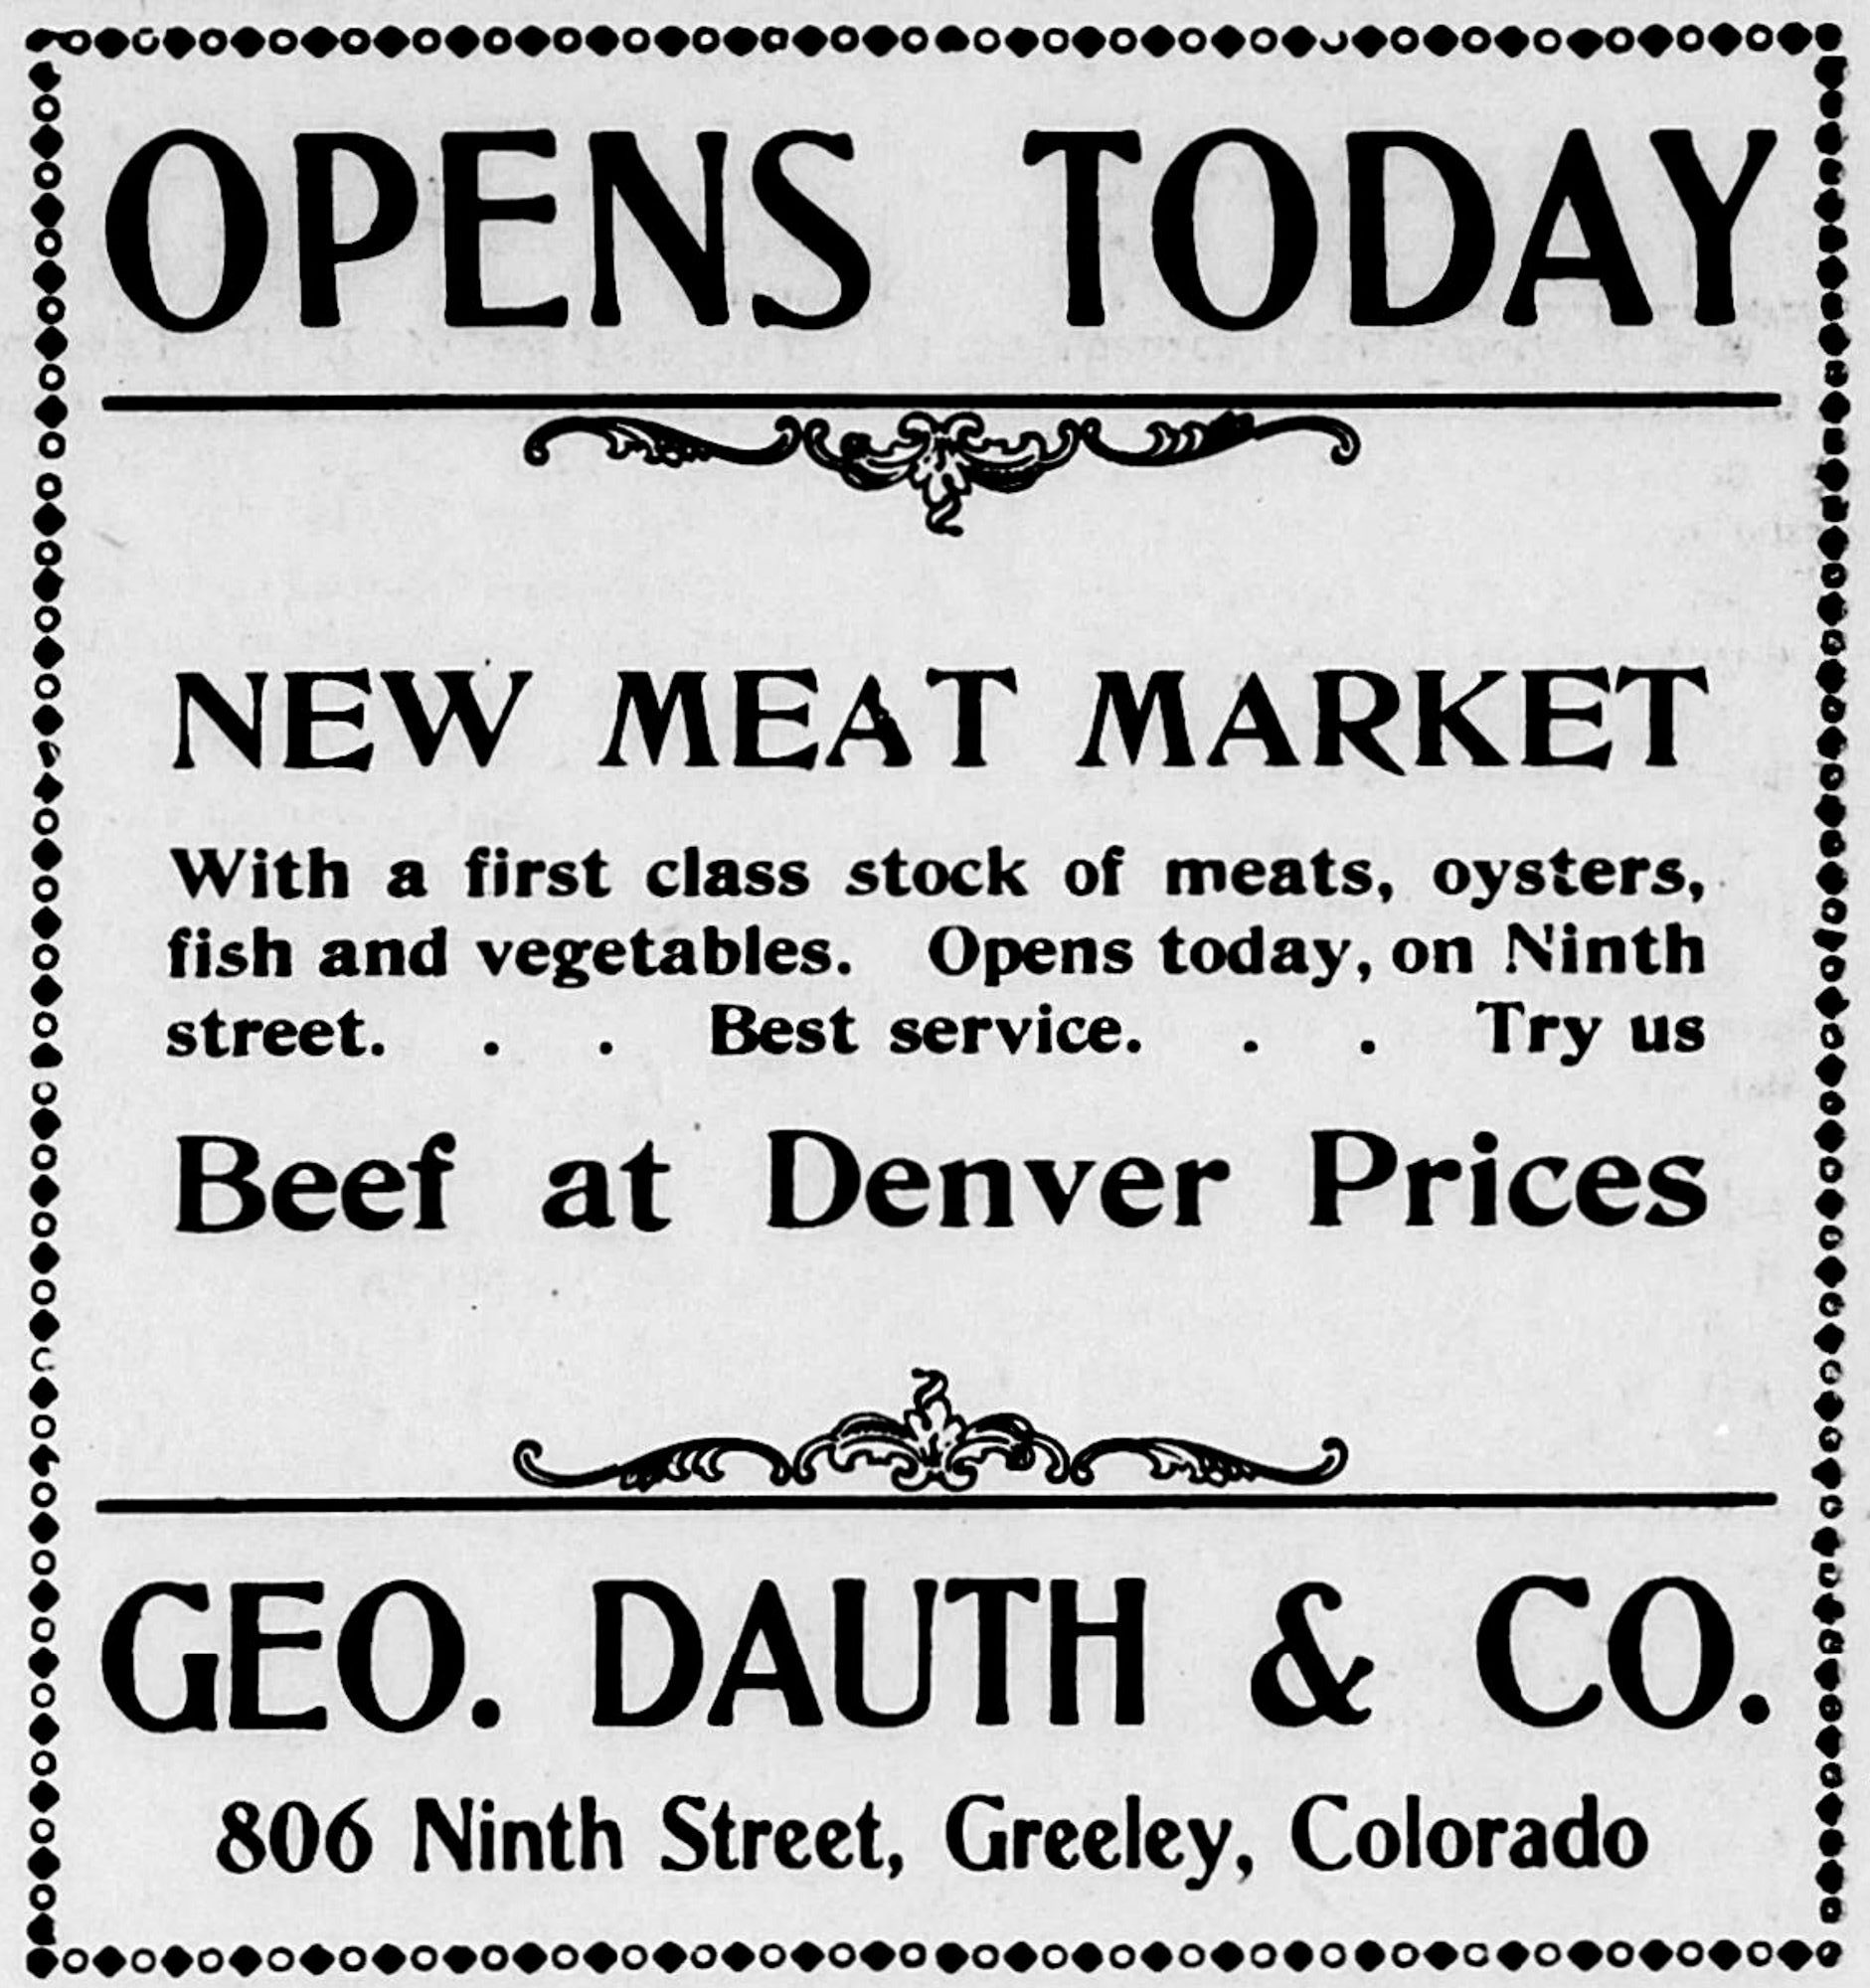 Dauth Family Archive - 1904-01-07 - The Greeley Tribune - George Dauth Store Advertisement